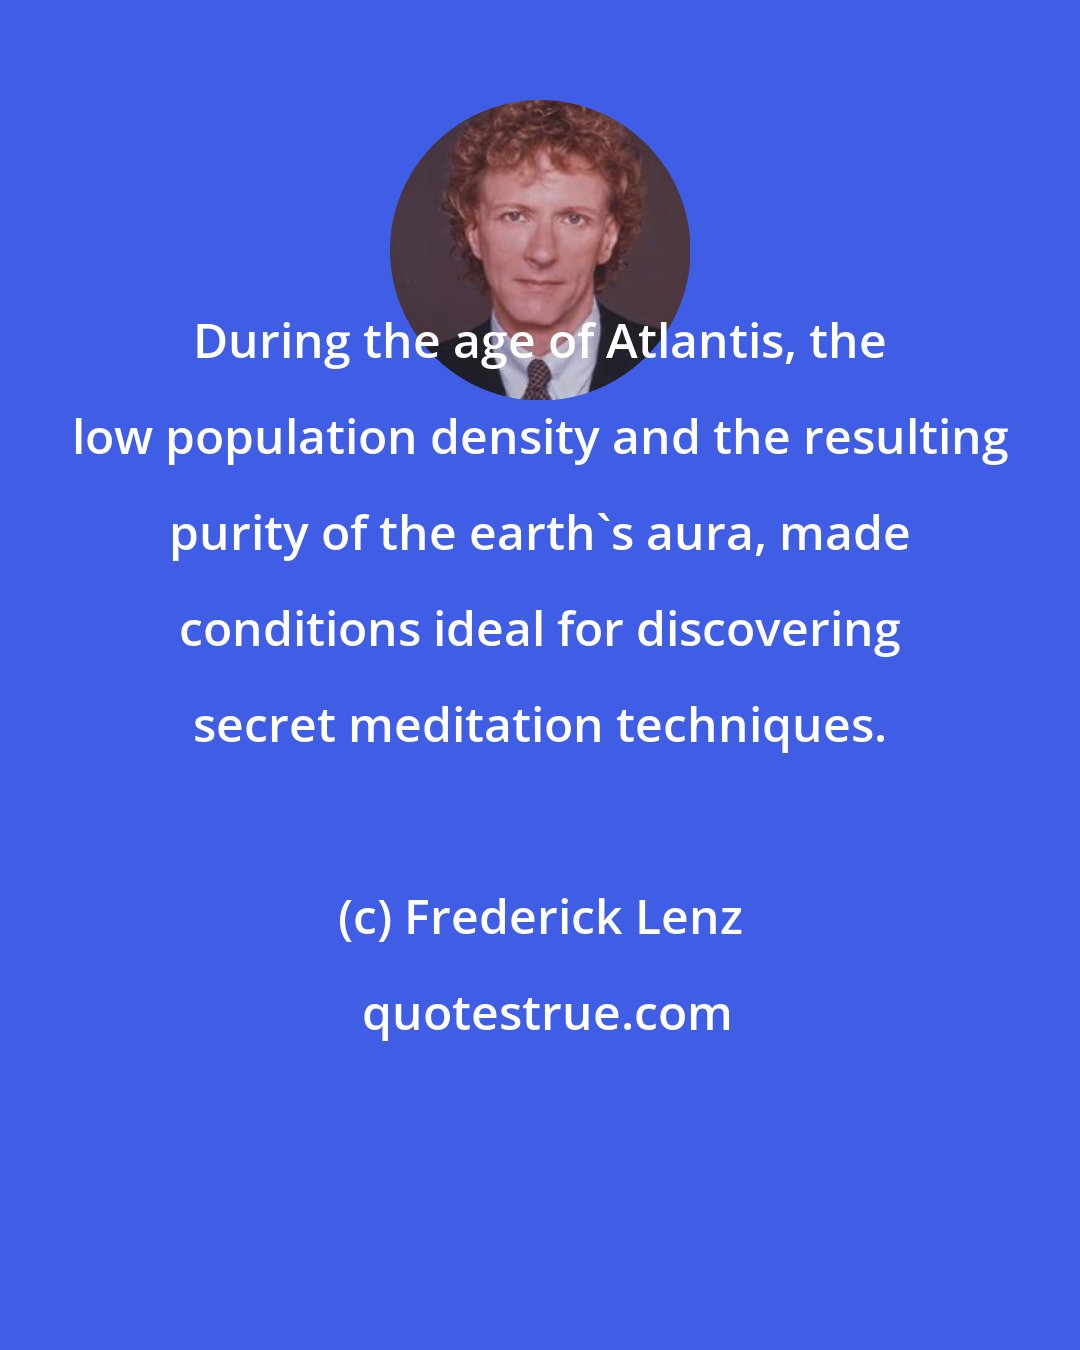 Frederick Lenz: During the age of Atlantis, the low population density and the resulting purity of the earth's aura, made conditions ideal for discovering secret meditation techniques.